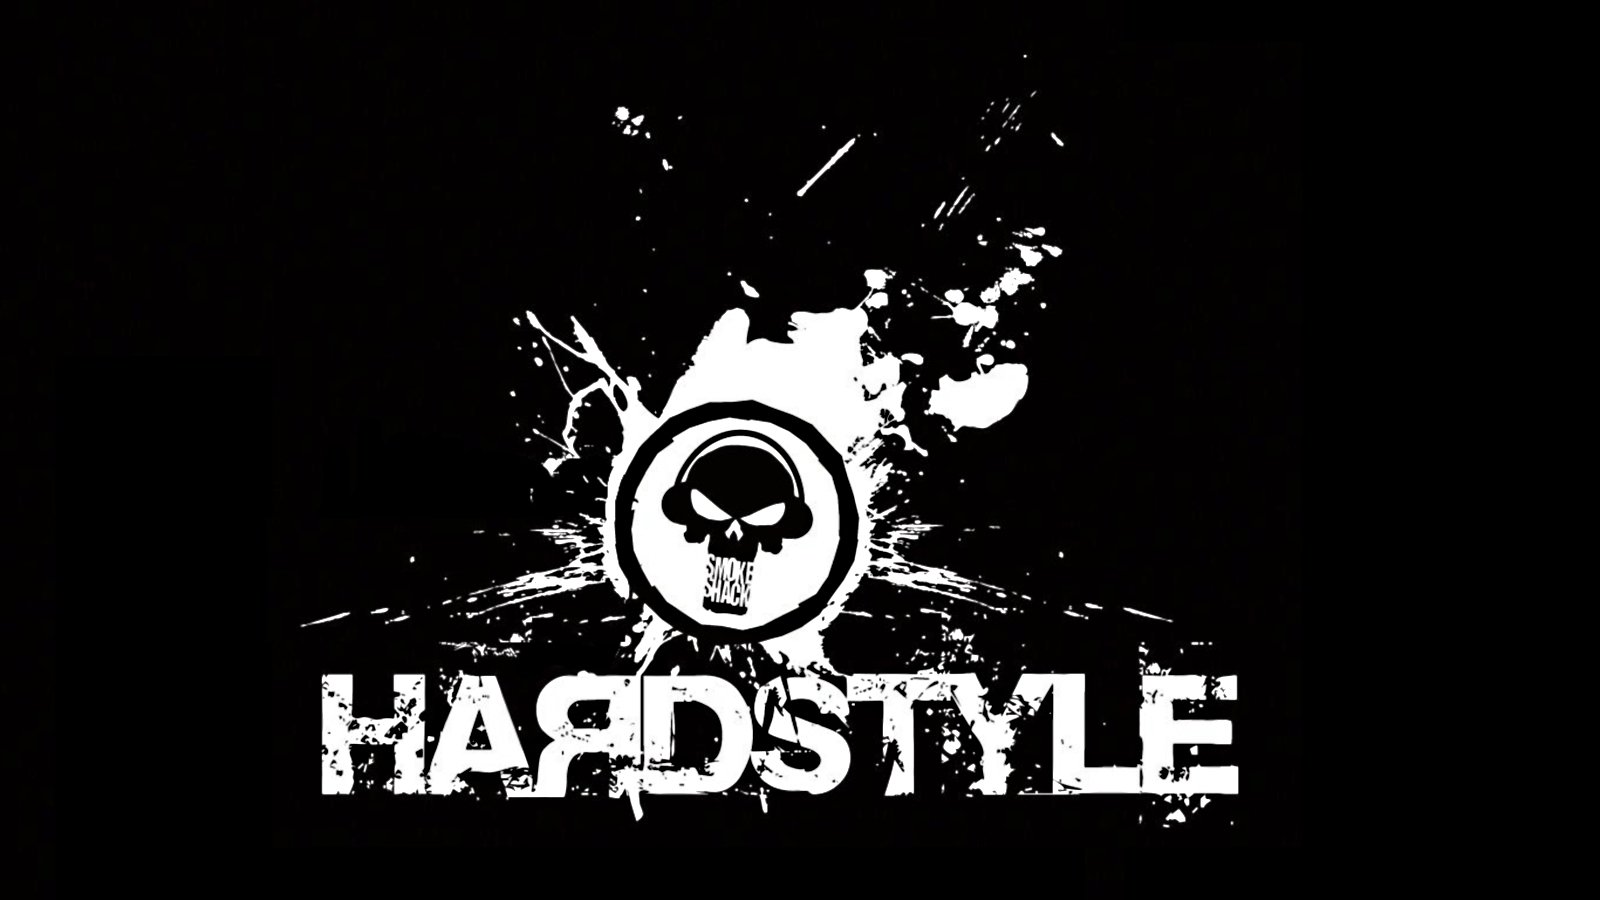 11 Hardstyle HD Wallpapers | Backgrounds - Wallpaper Abyss